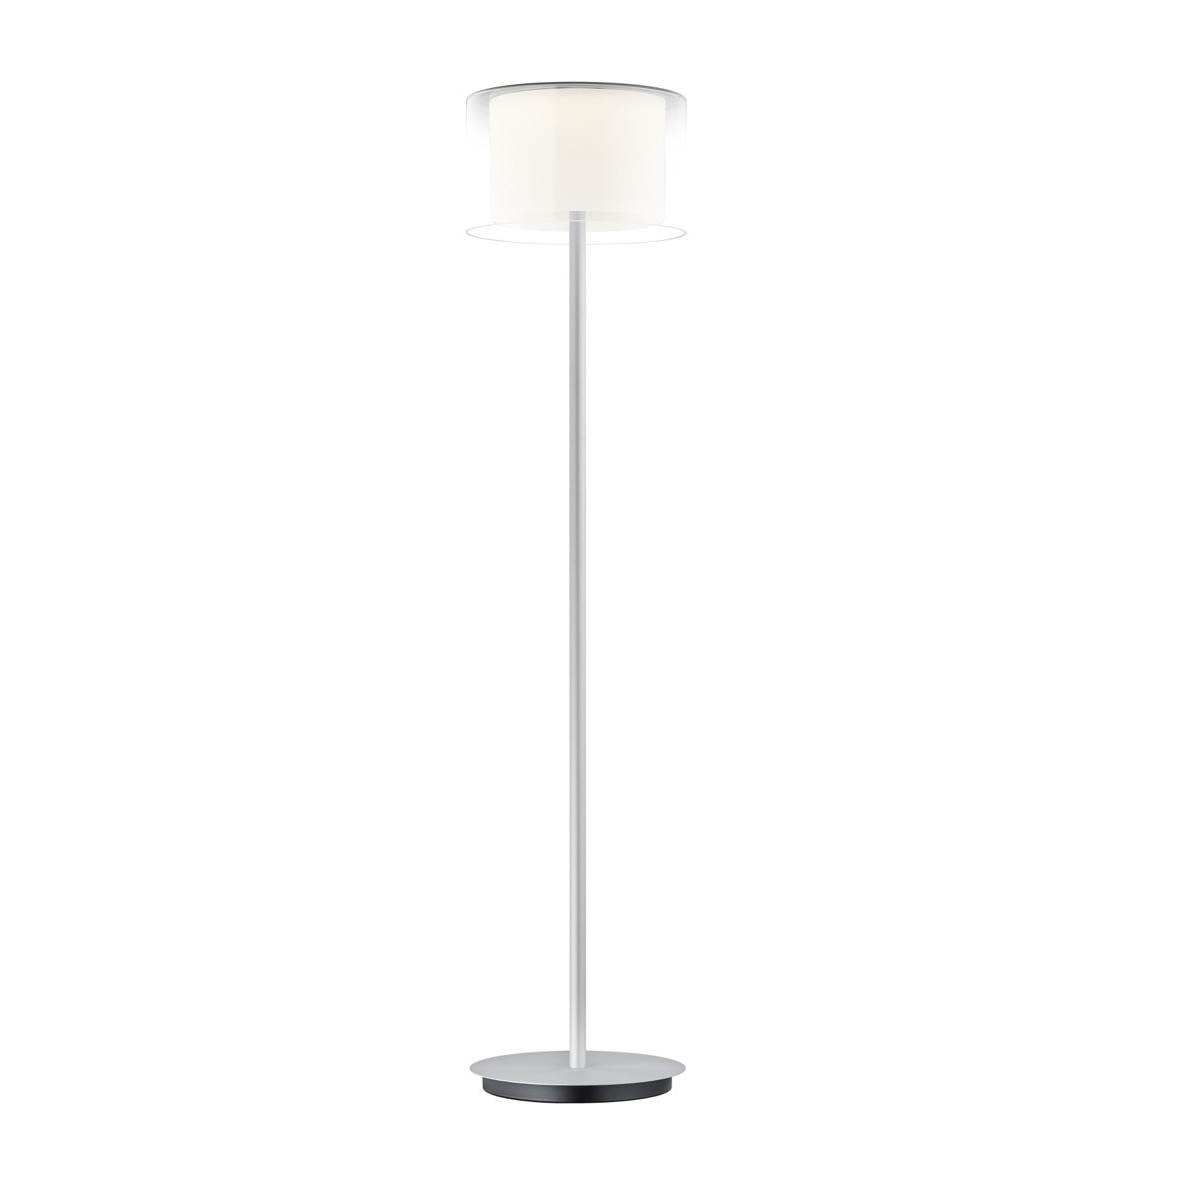 BANKAMP LED Stehleuchte GRAND CLEAR